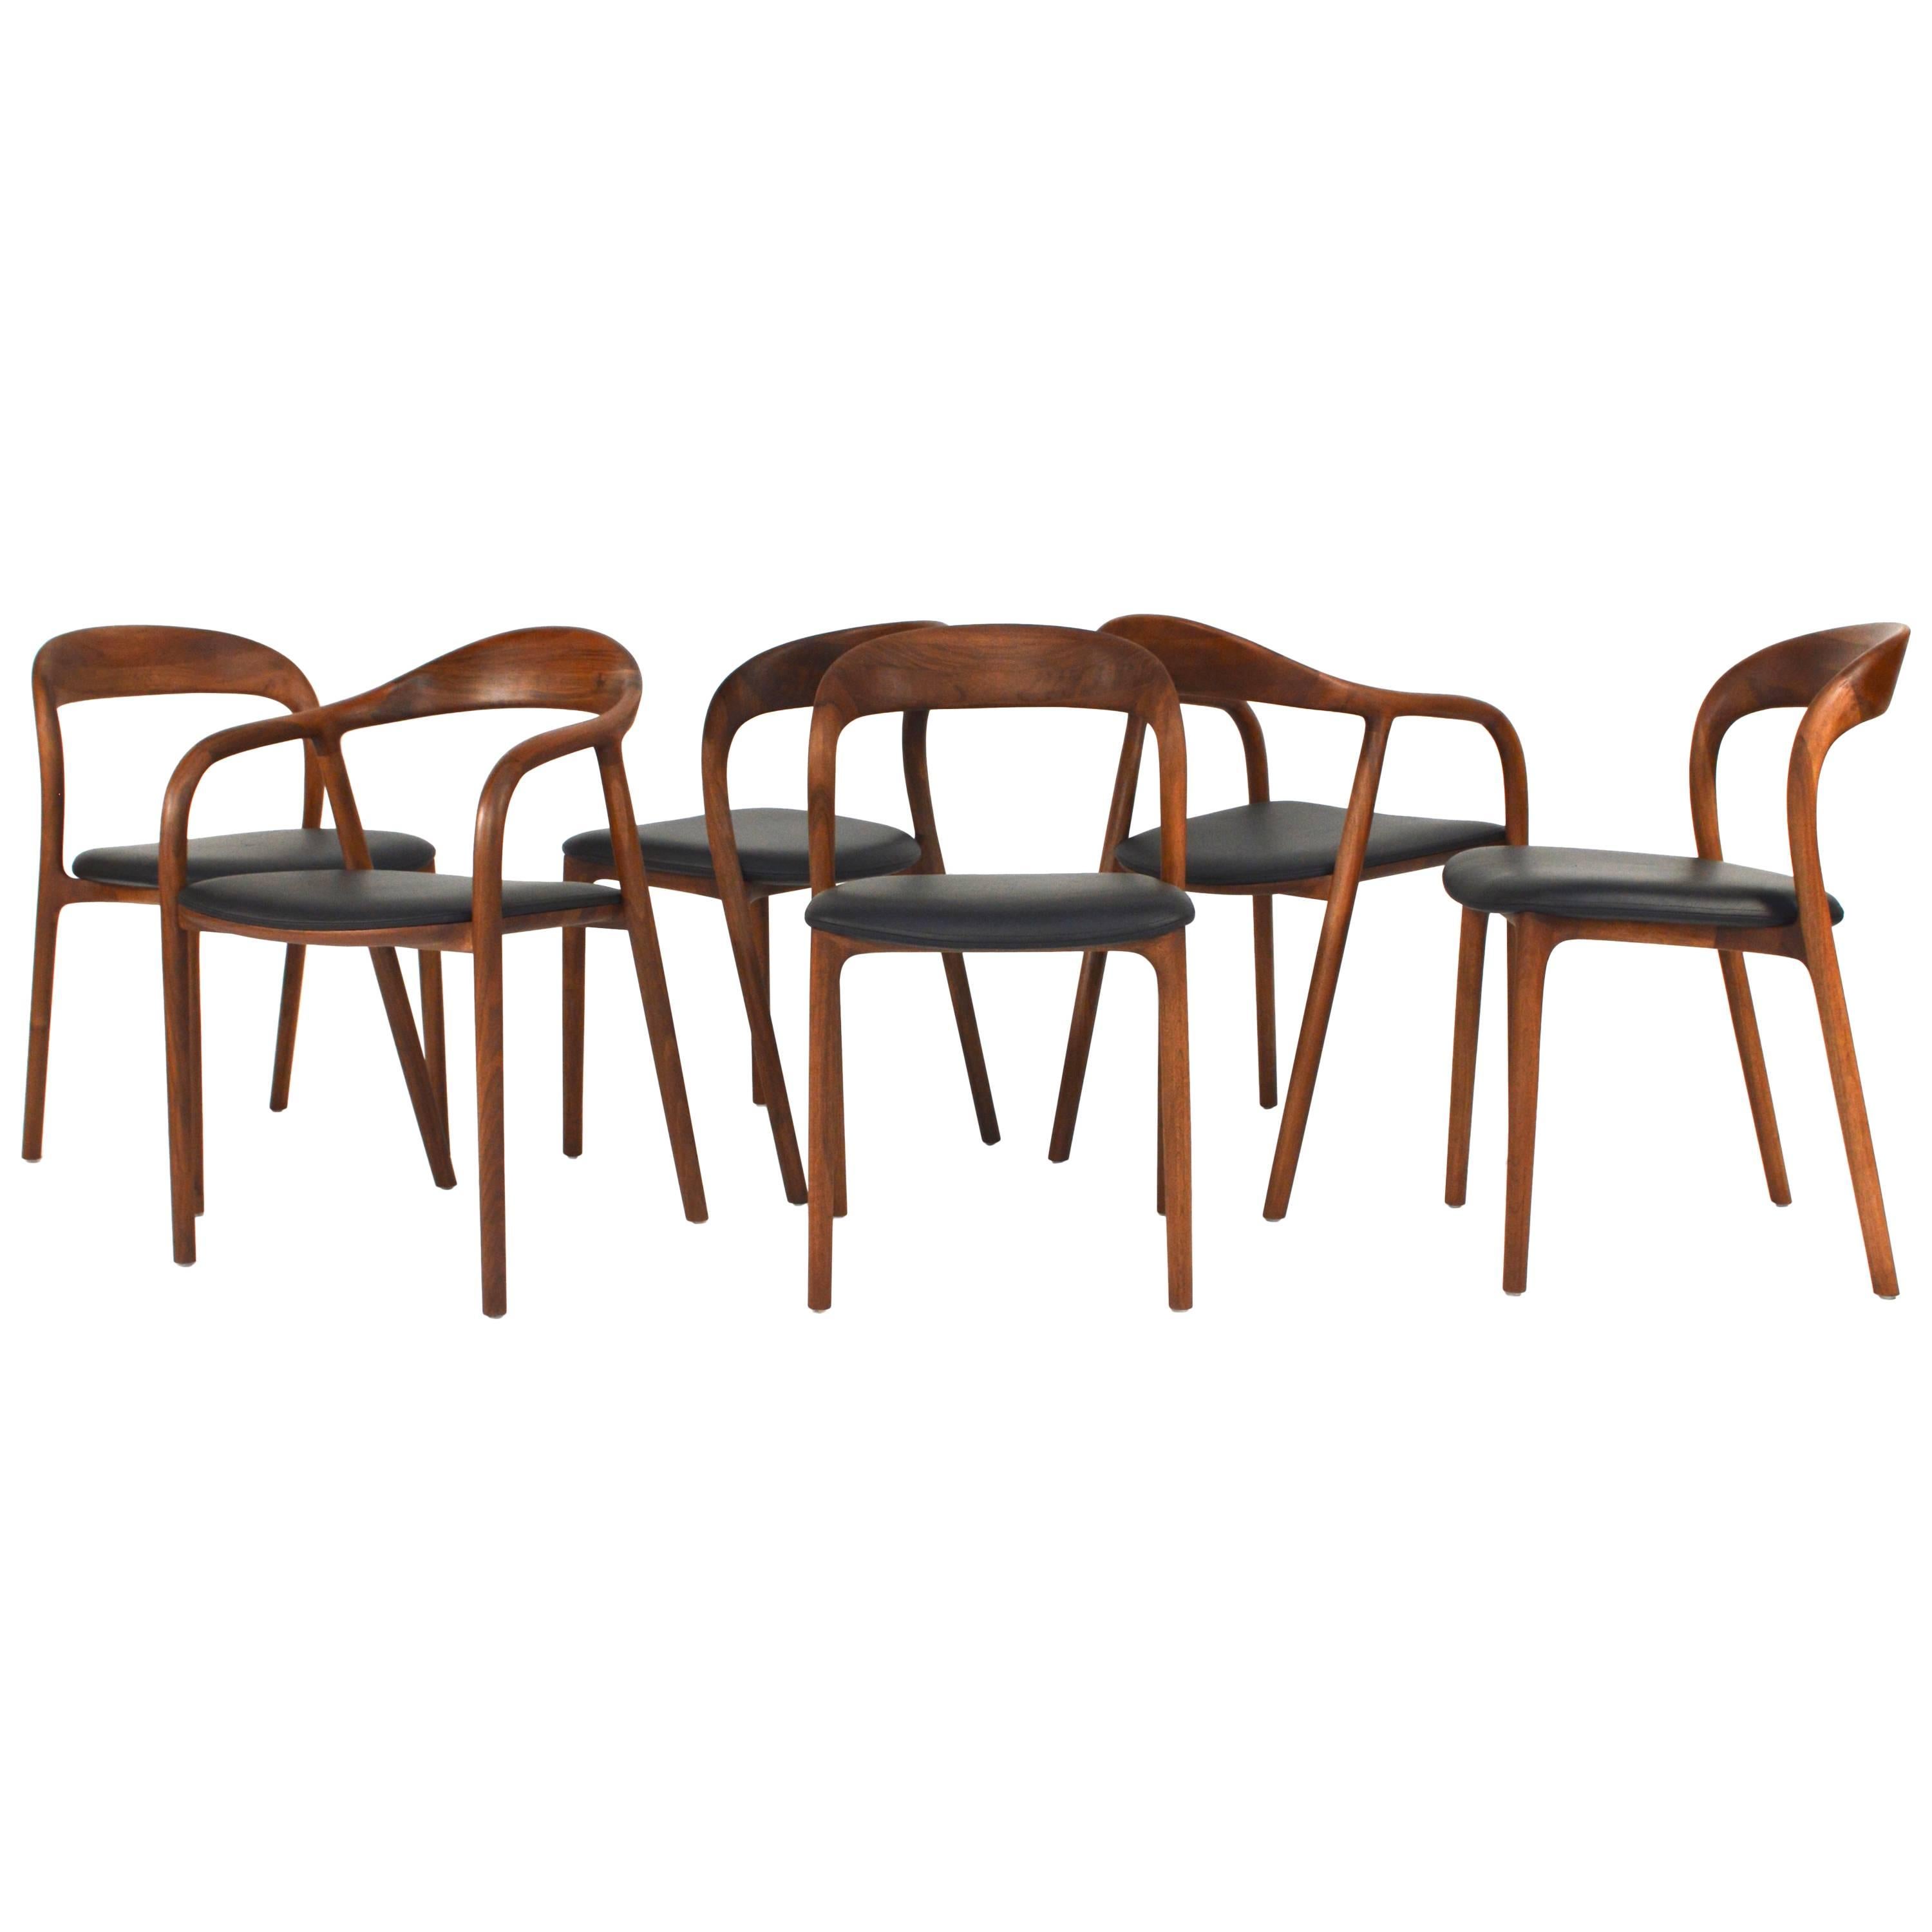 Artisan Collection Dining Room Chairs in European Walnut